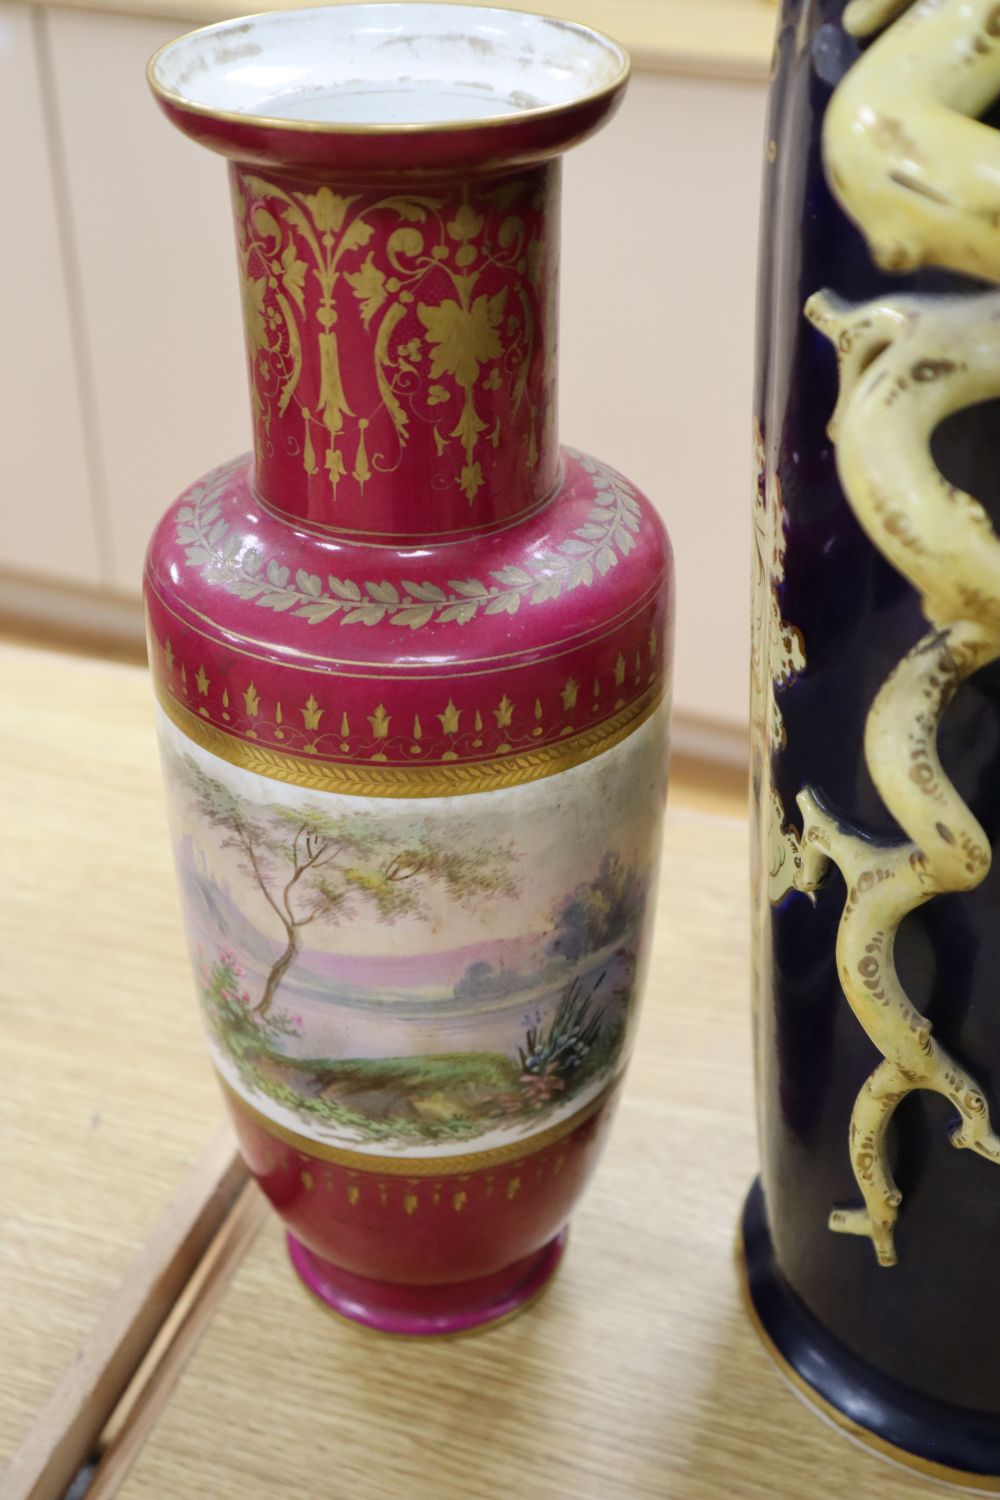 A French porcelain vase table lamp and another Continental vase table lamp